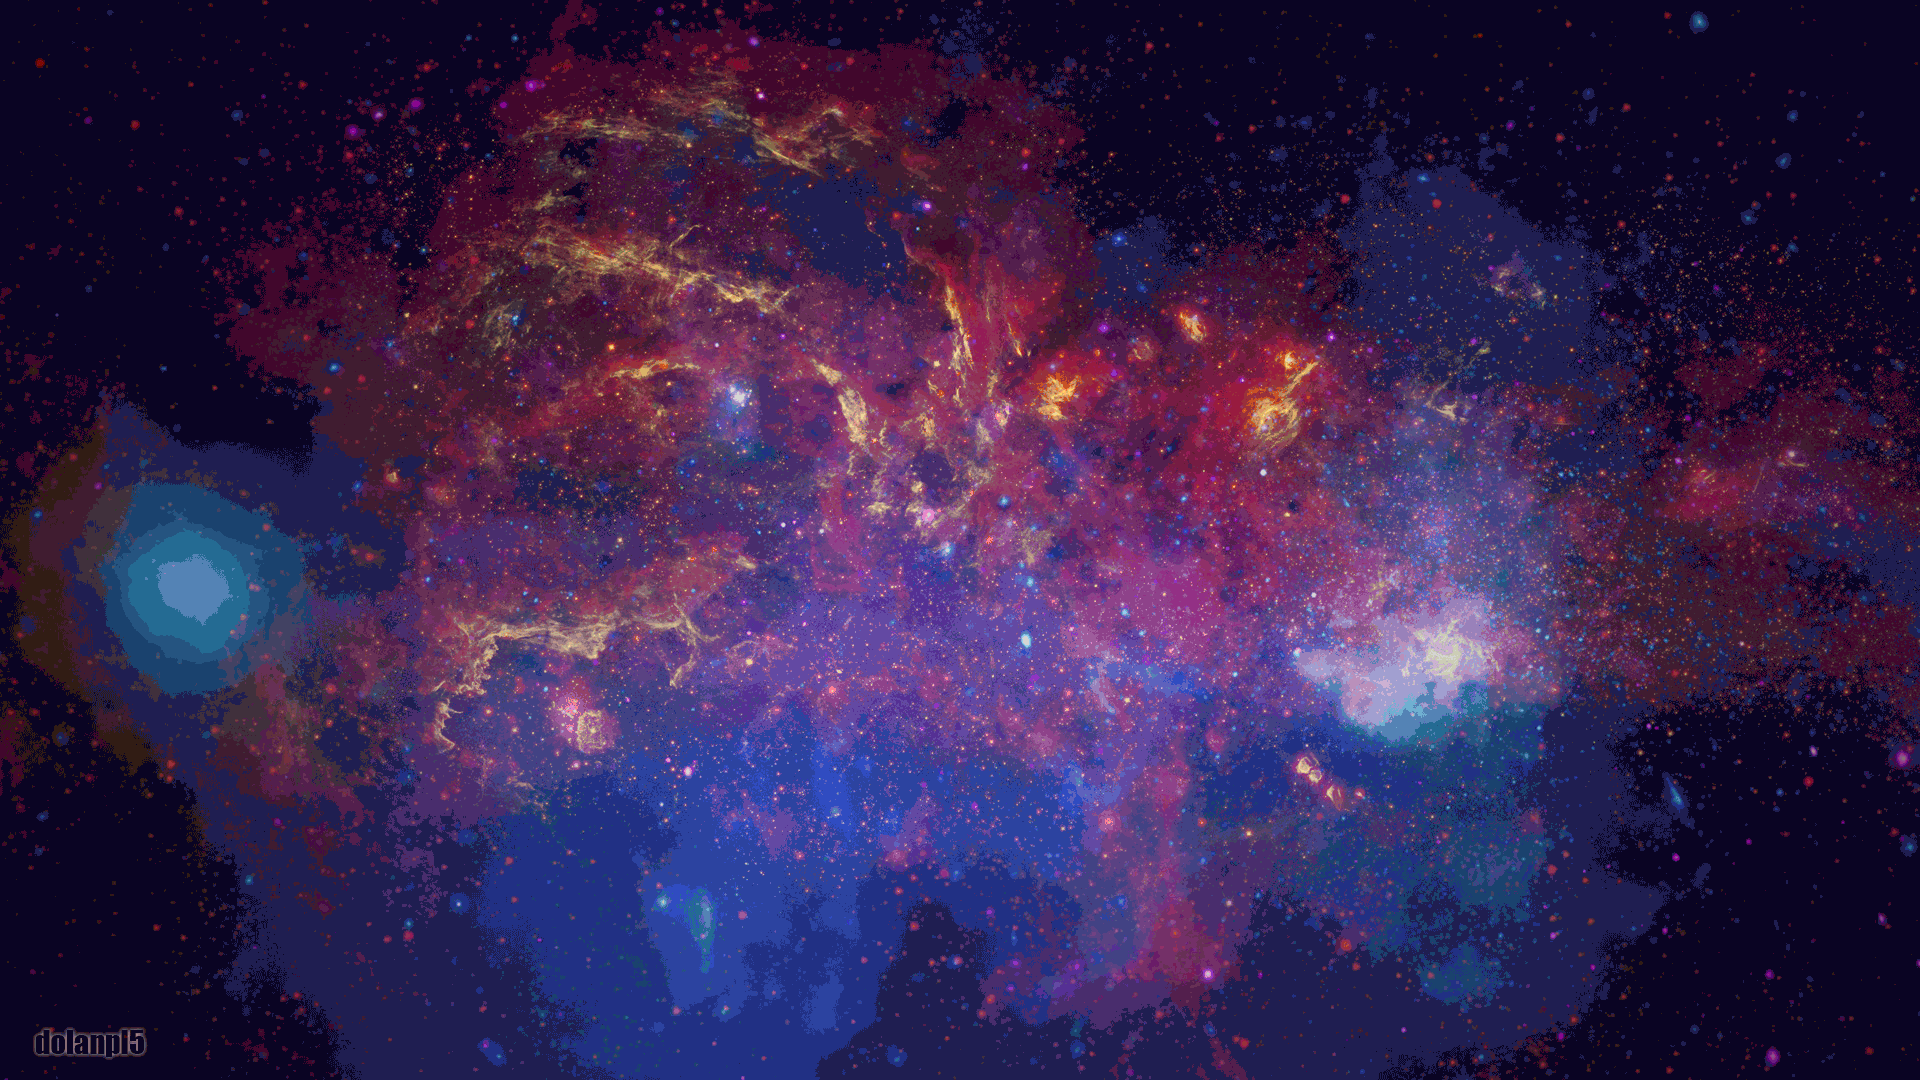 Space Wallpaper 4k Space Wallpaper 4k Via Giphy Galaxy Images and